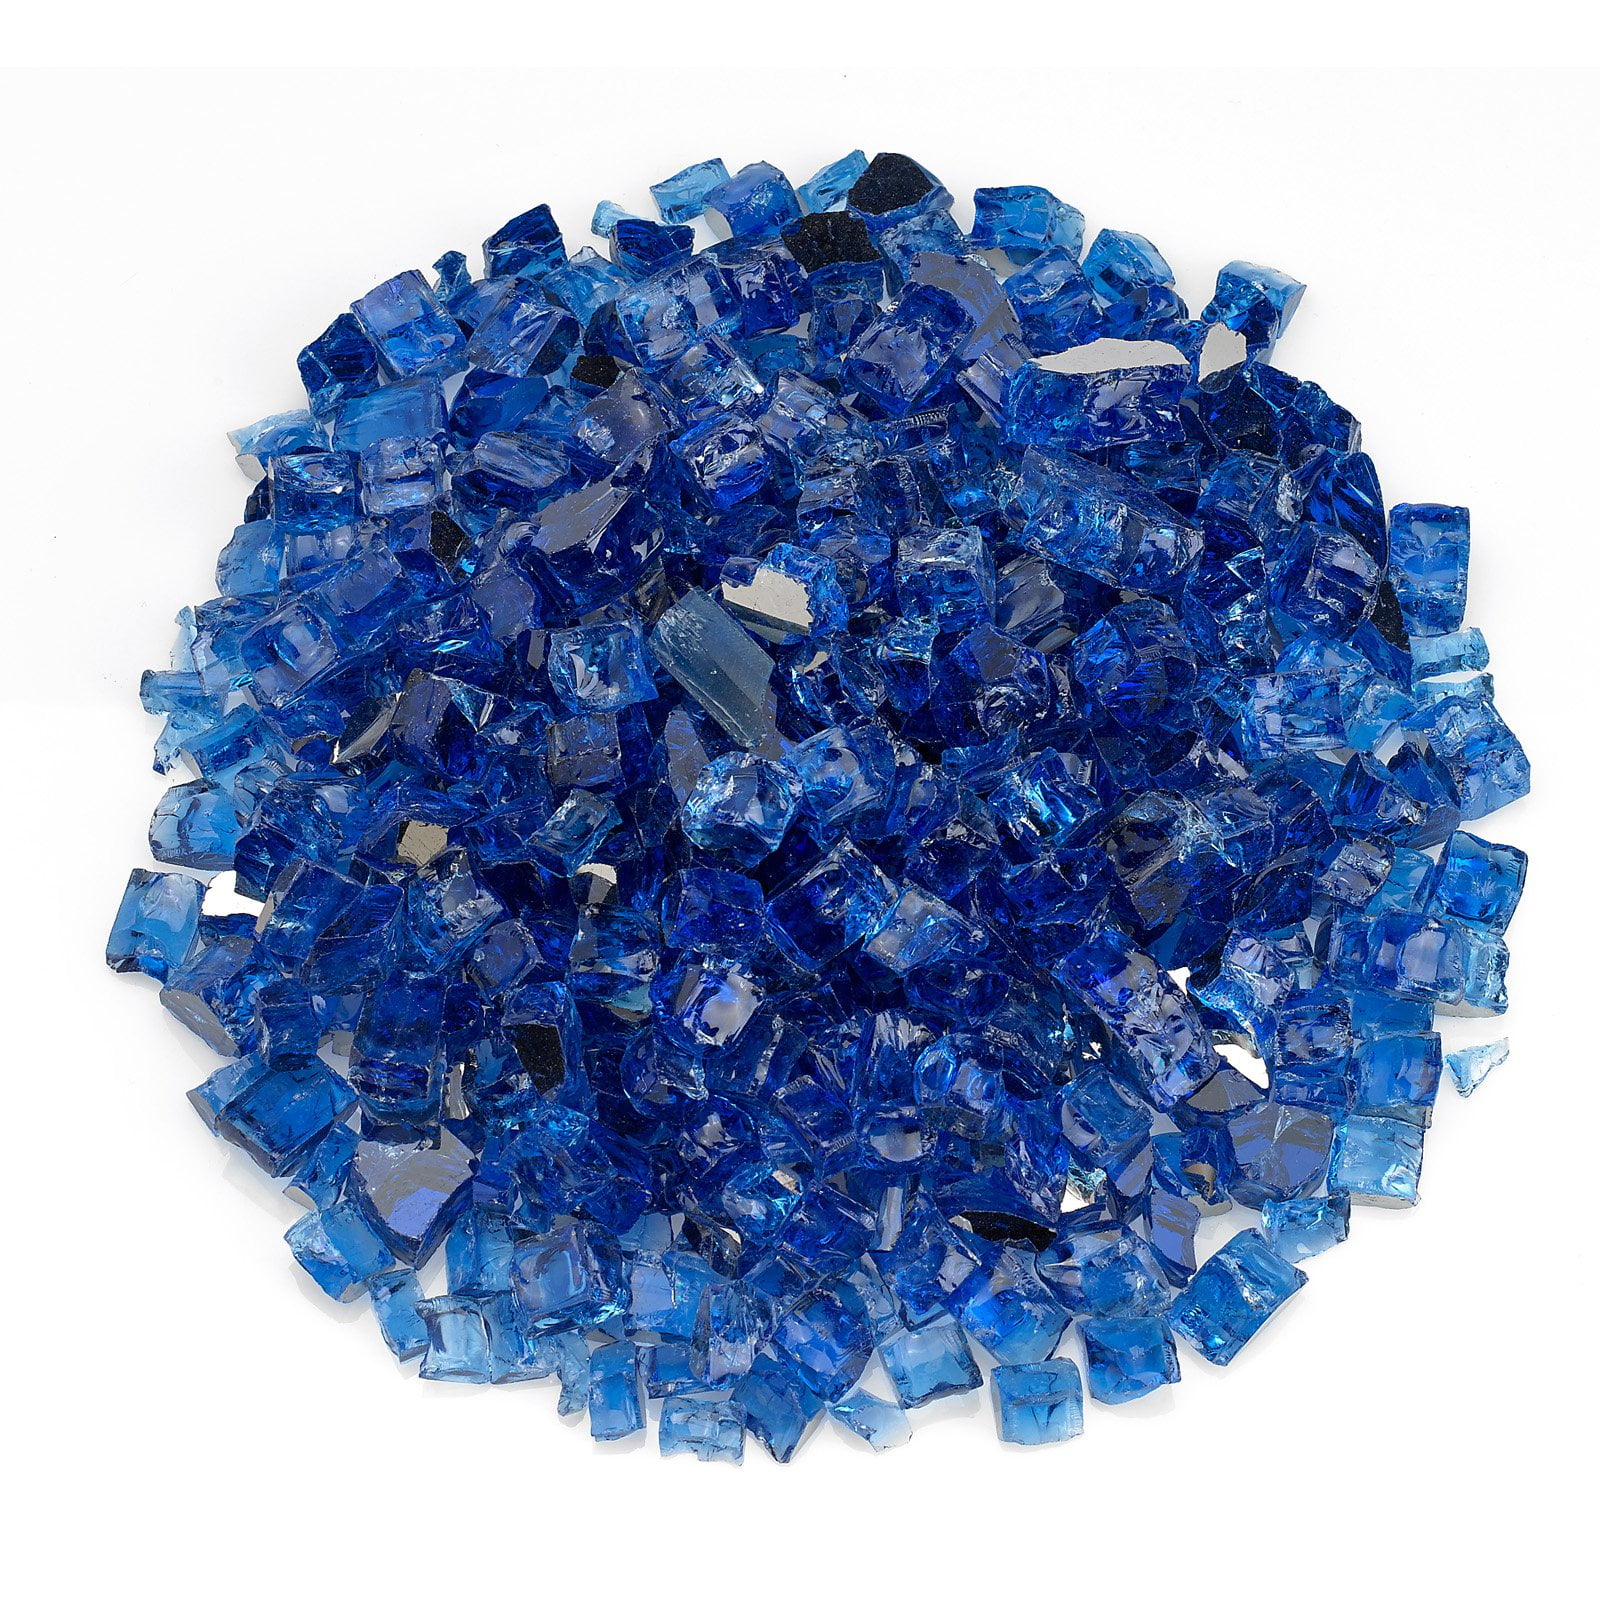 Picture of American Fireglass AFF-COBLRF-10 0.25 in. Cobalt Blue Reflective Fire Glass - 10 lbs